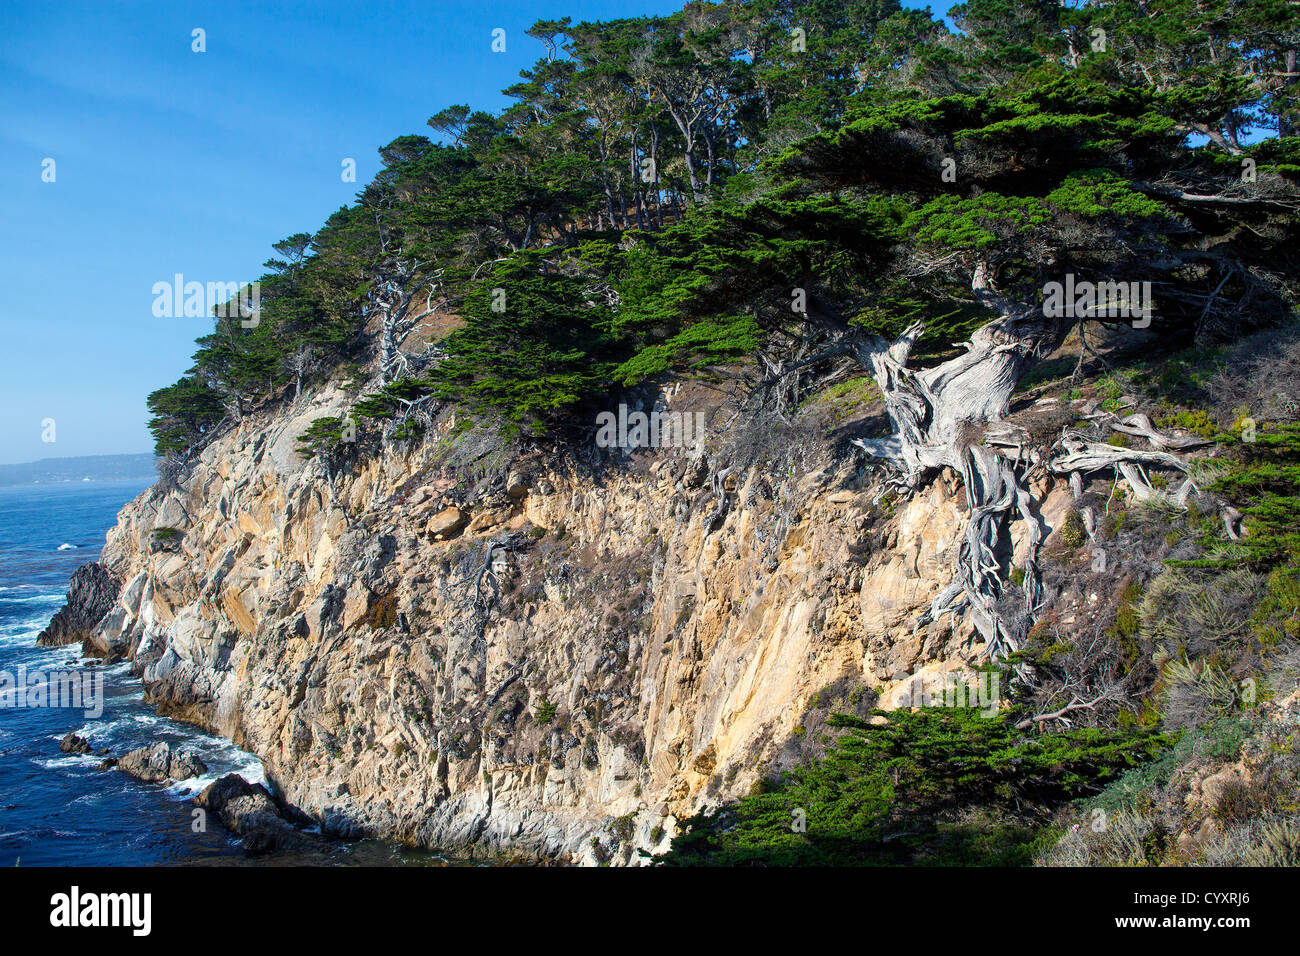 A giant cypress tree grows against a cliff at Point Lobos, California. Stock Photo